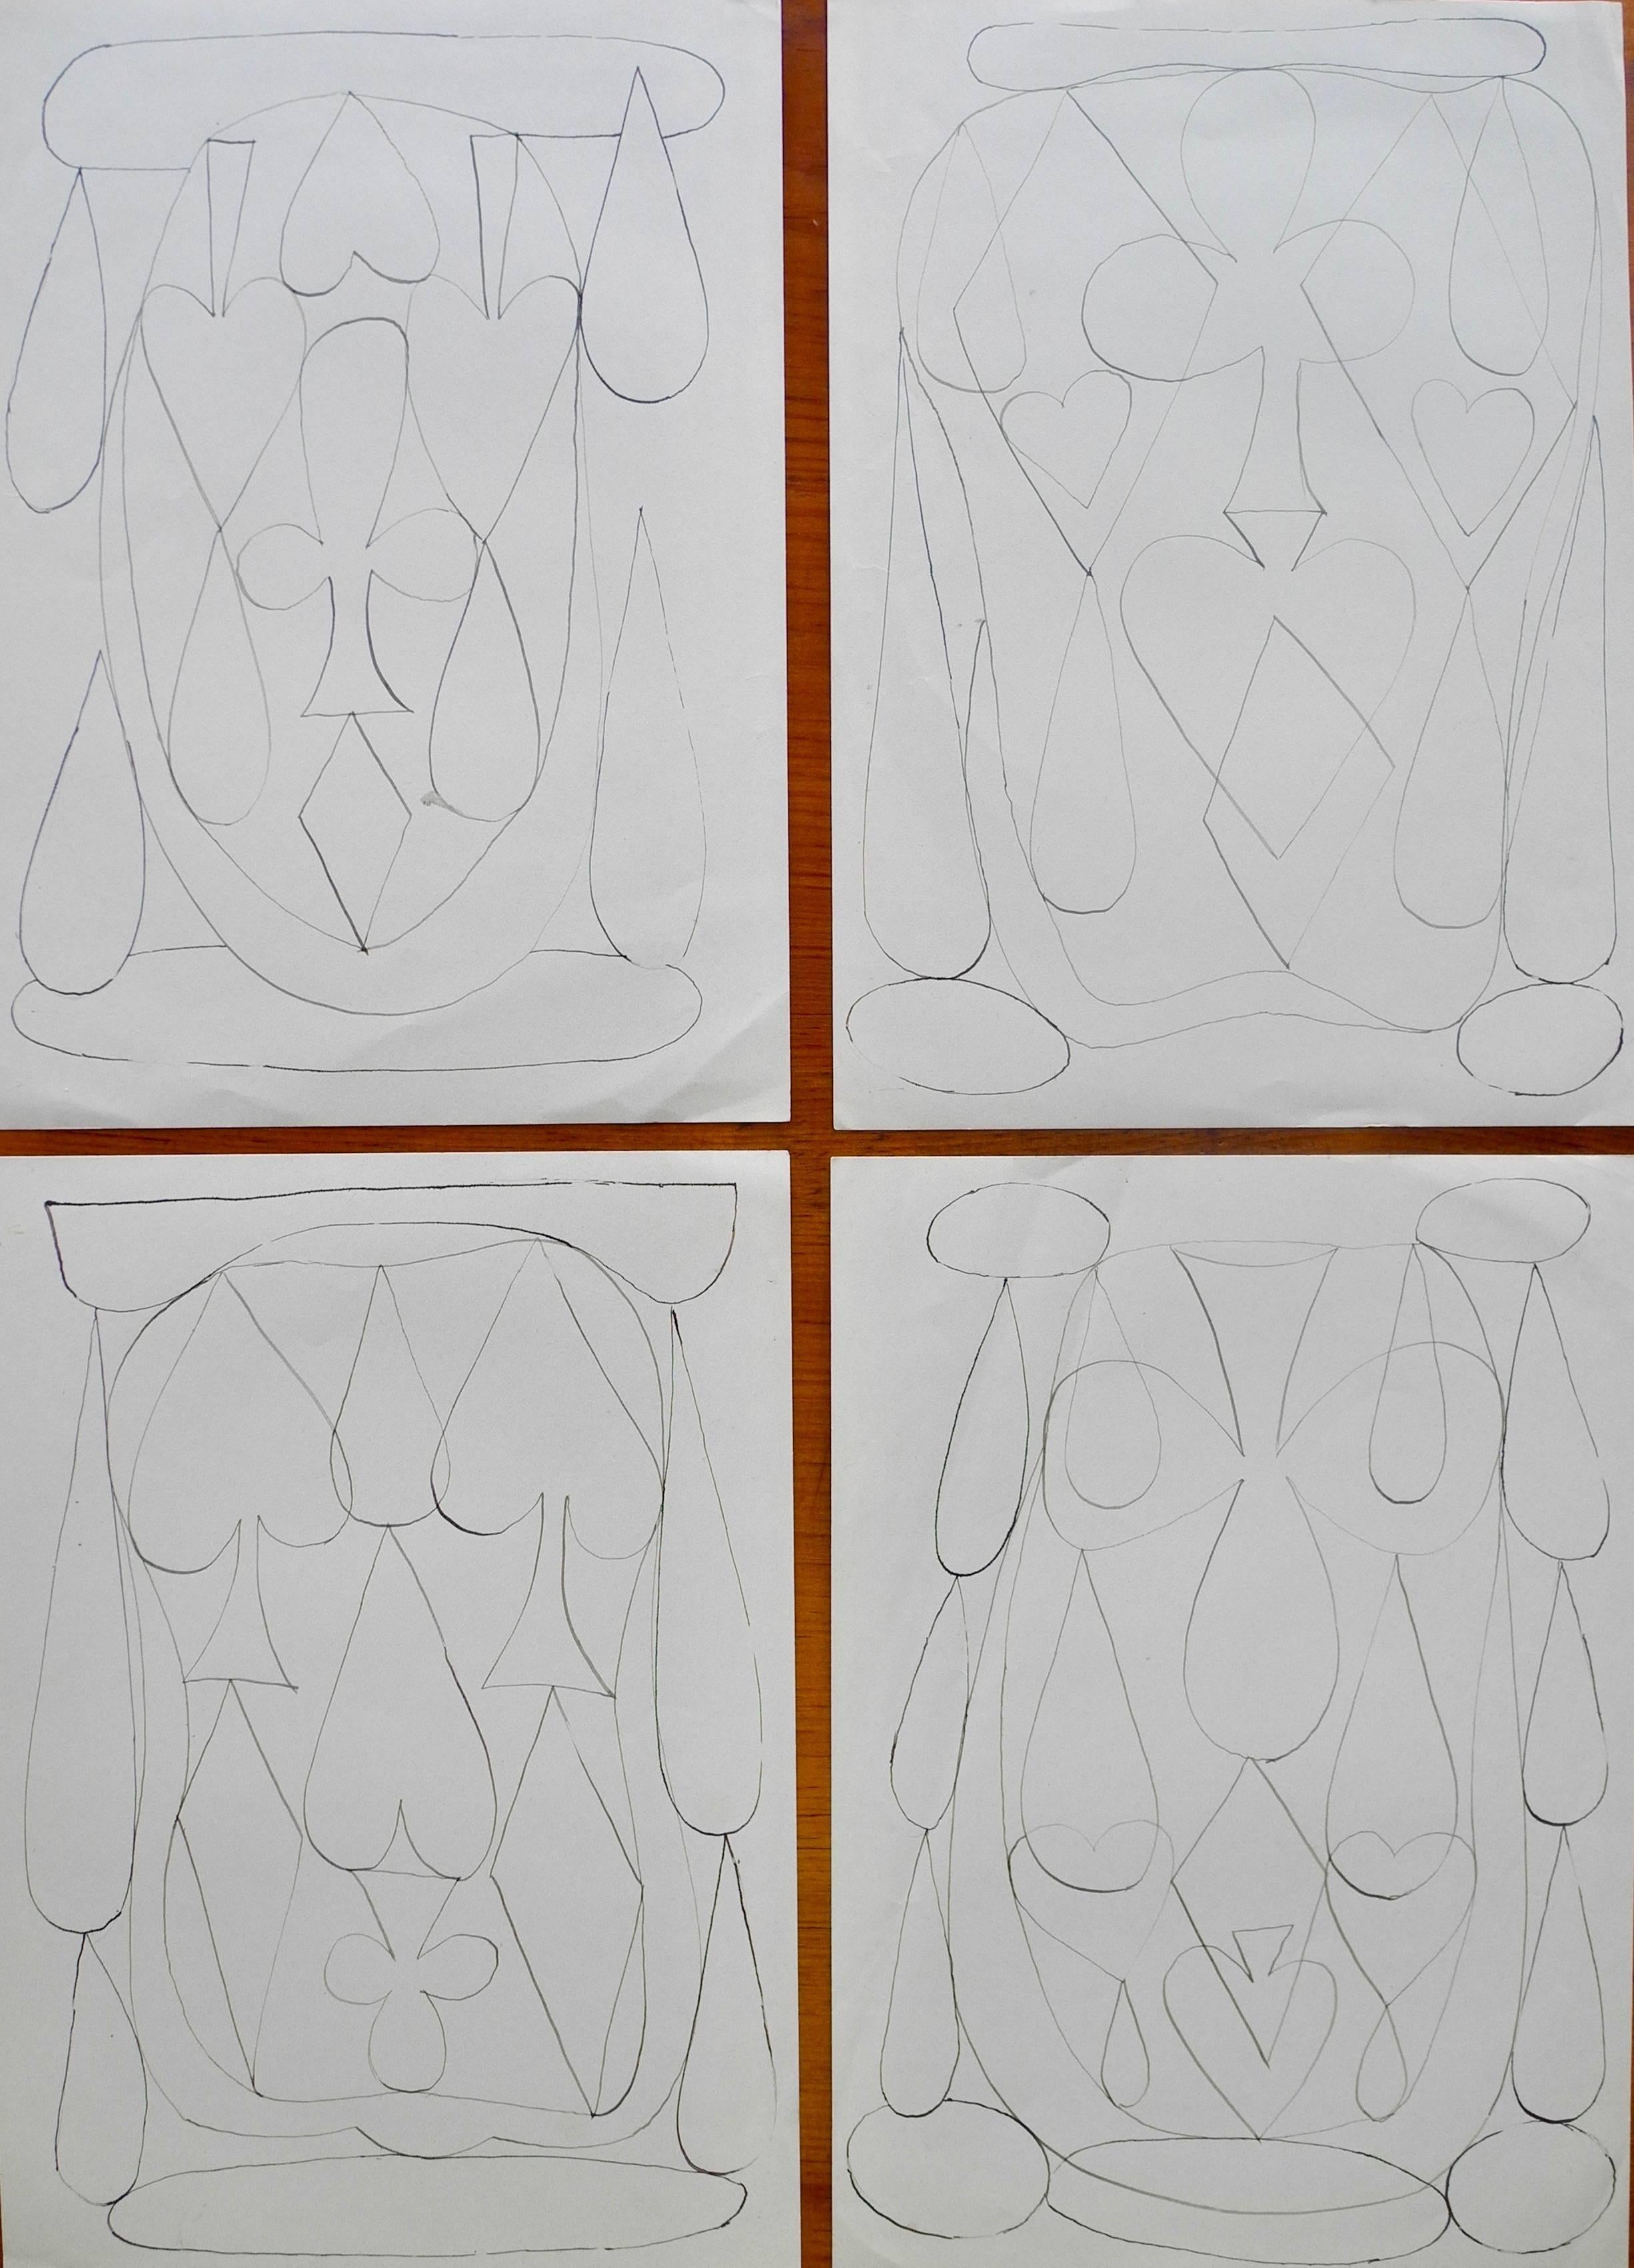 These four ink drawings by designer or artist John-Paul Philippe depict the four suits in a deck of cards. Each signed on the back. Sold as a set of four.